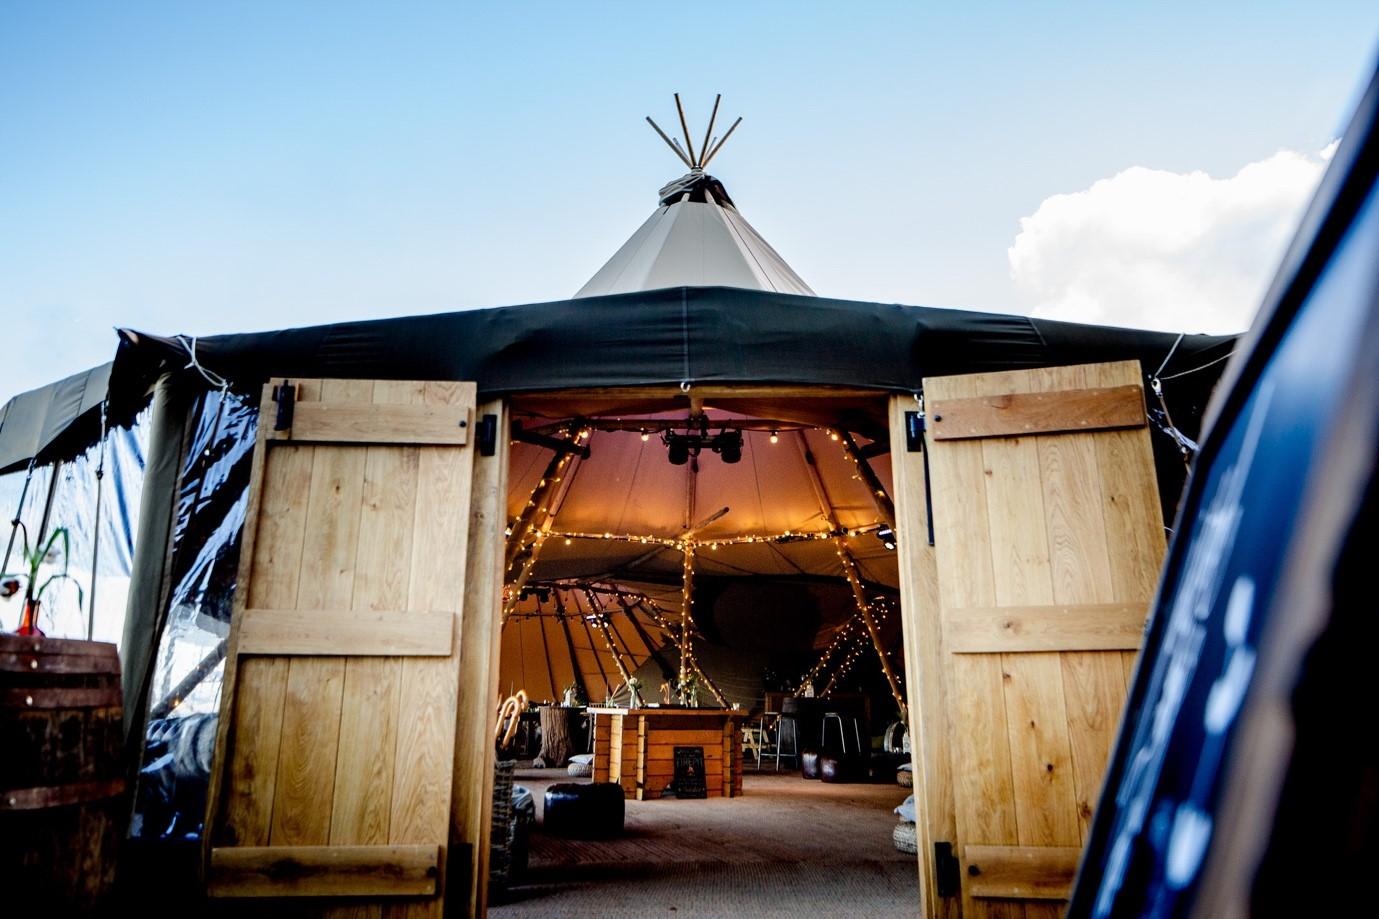 SPECIAL EVENT TIPI GAVIN JACOBS PHOTOGRAPHY